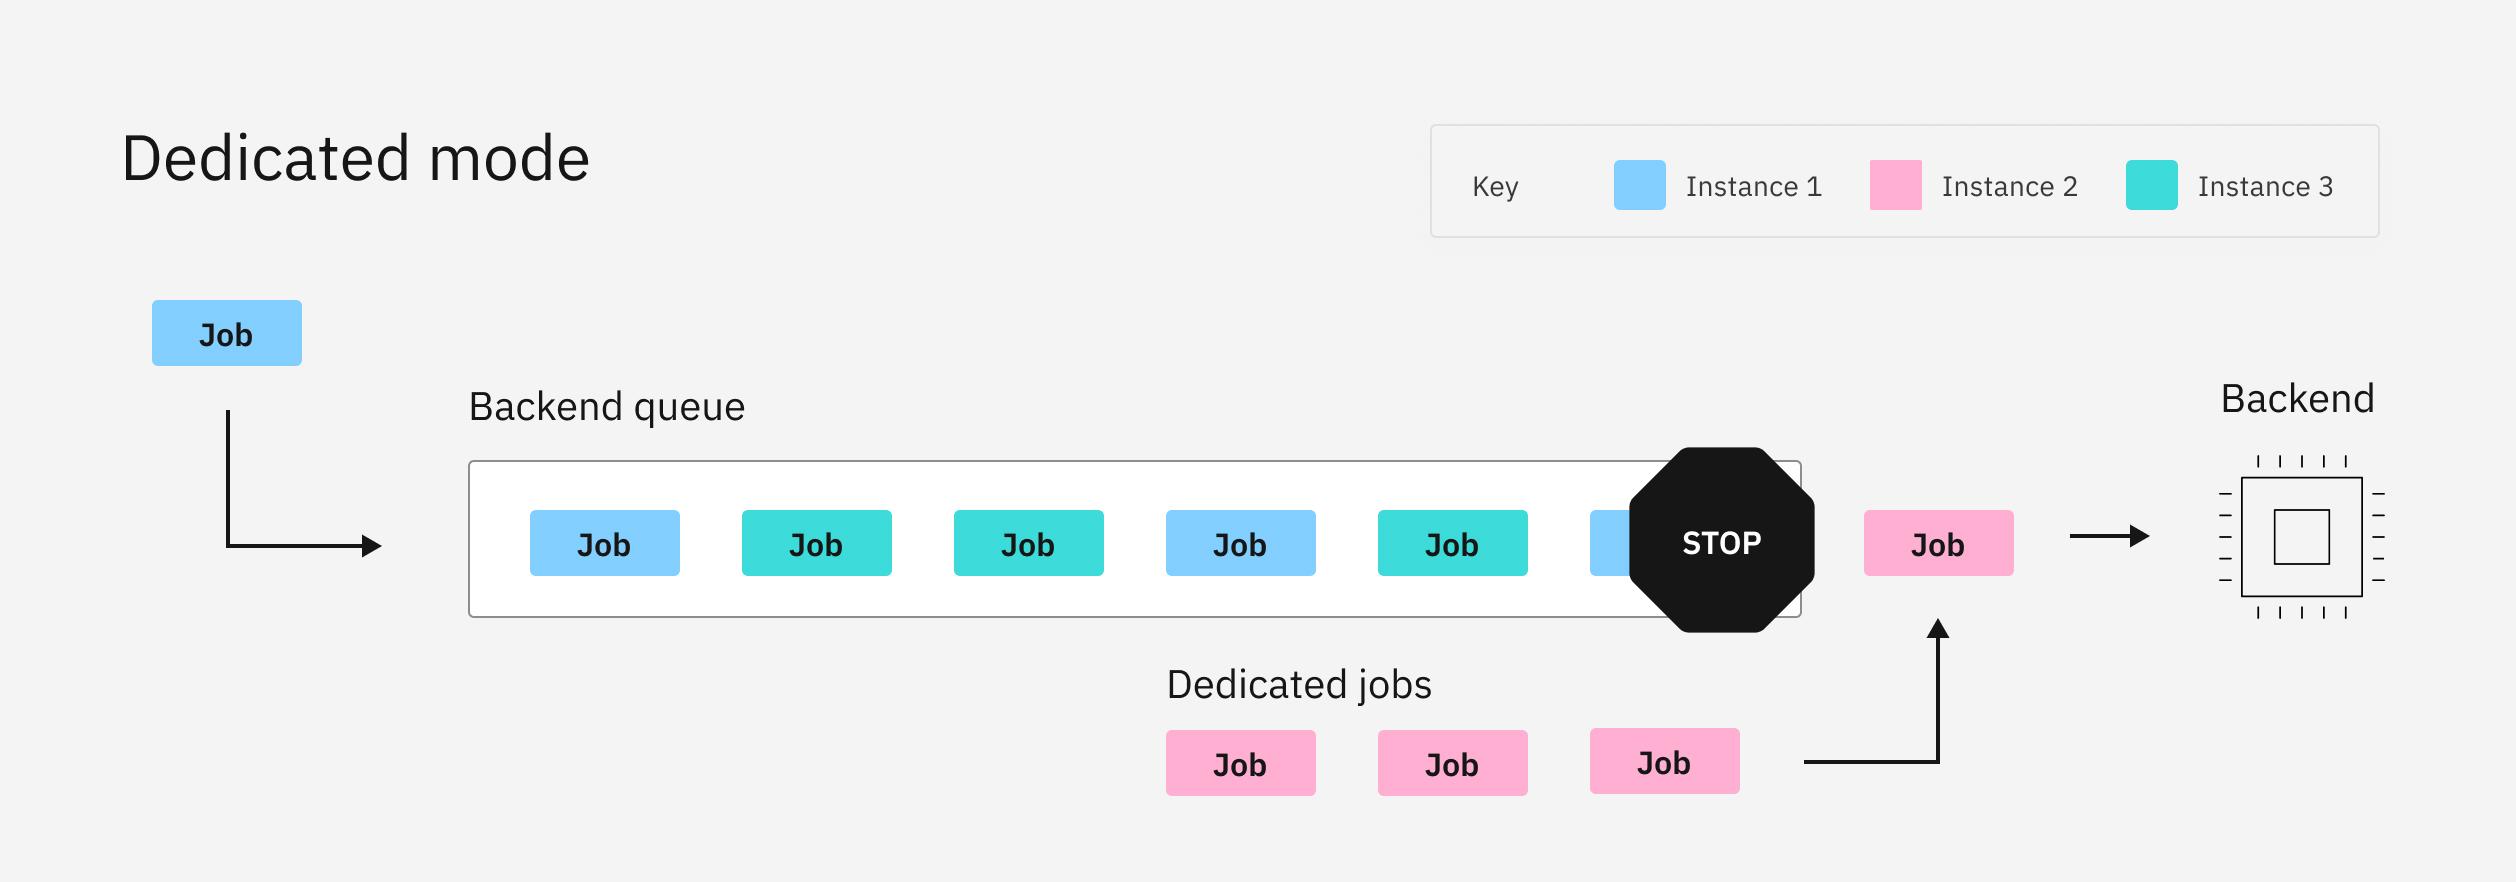 A job enters the queue and joins other jobs from various instances.  The jobs that are sent from Instance 2 are all processed in their own dedicated queue while jobs from other instances wait in the normal queue.